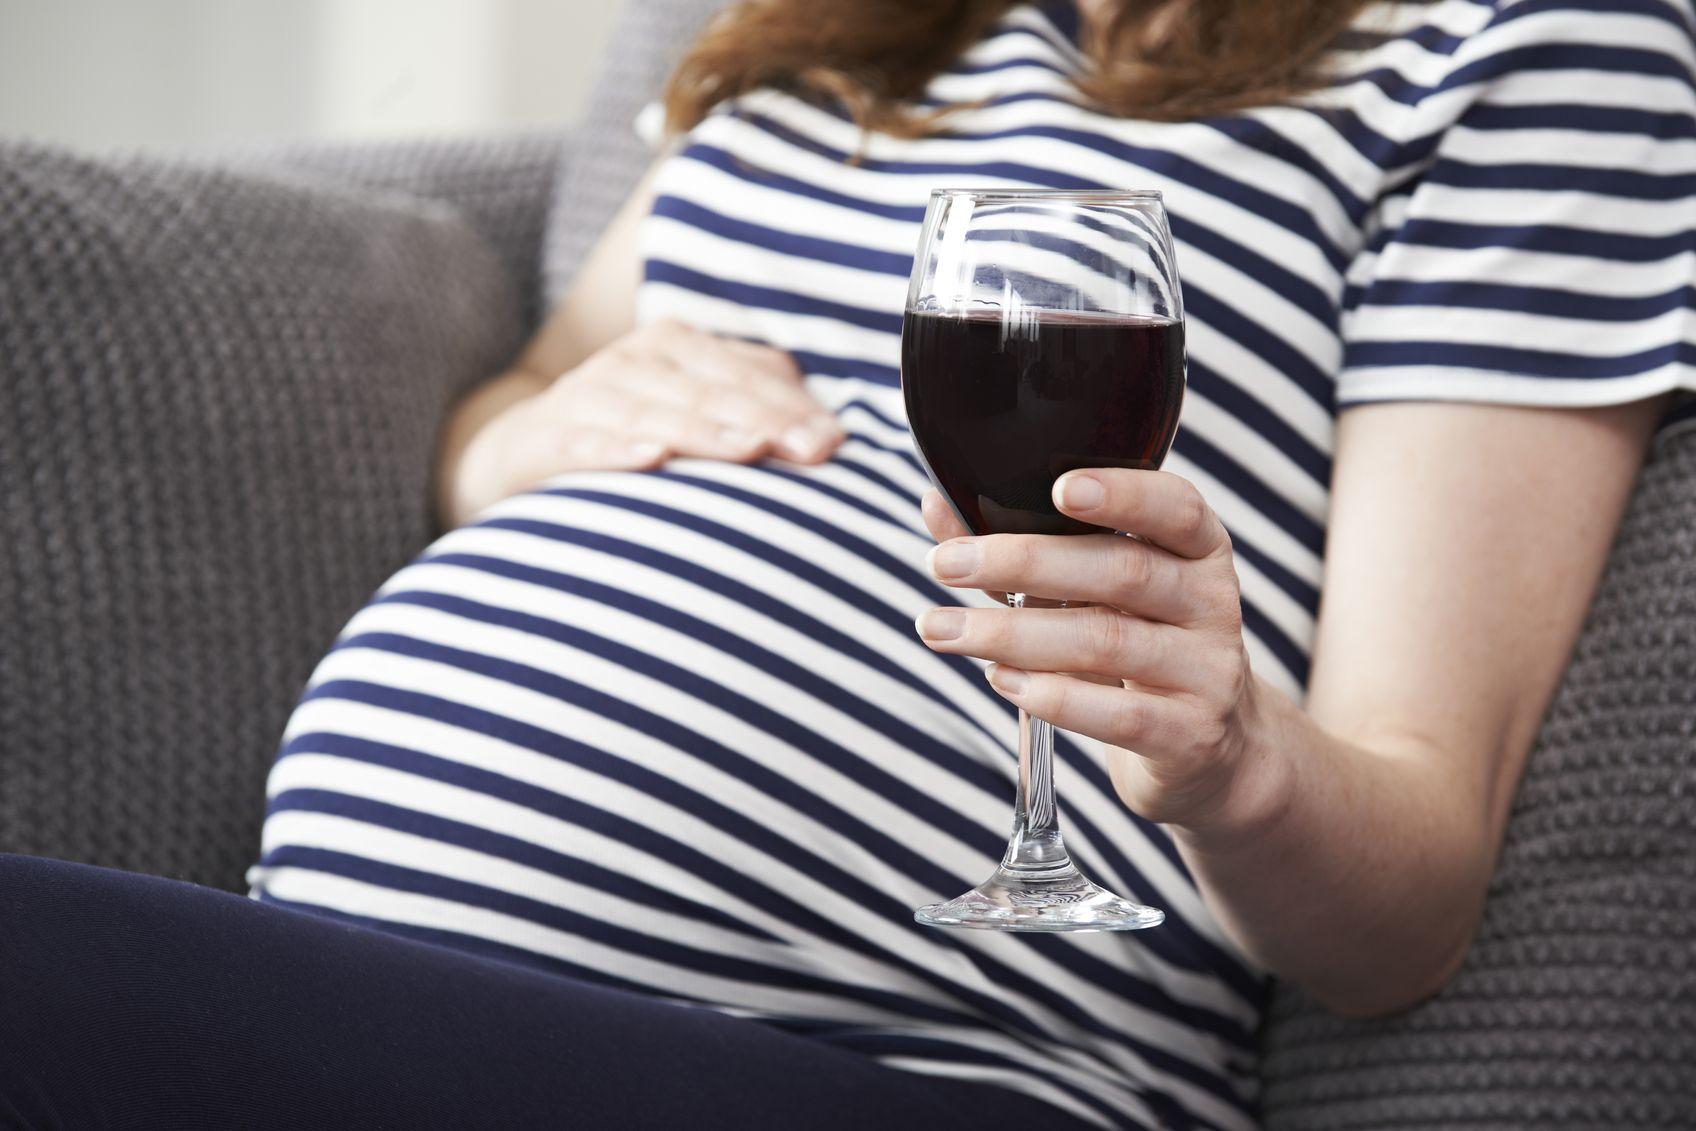 Can i have a glass of wine while pregnant